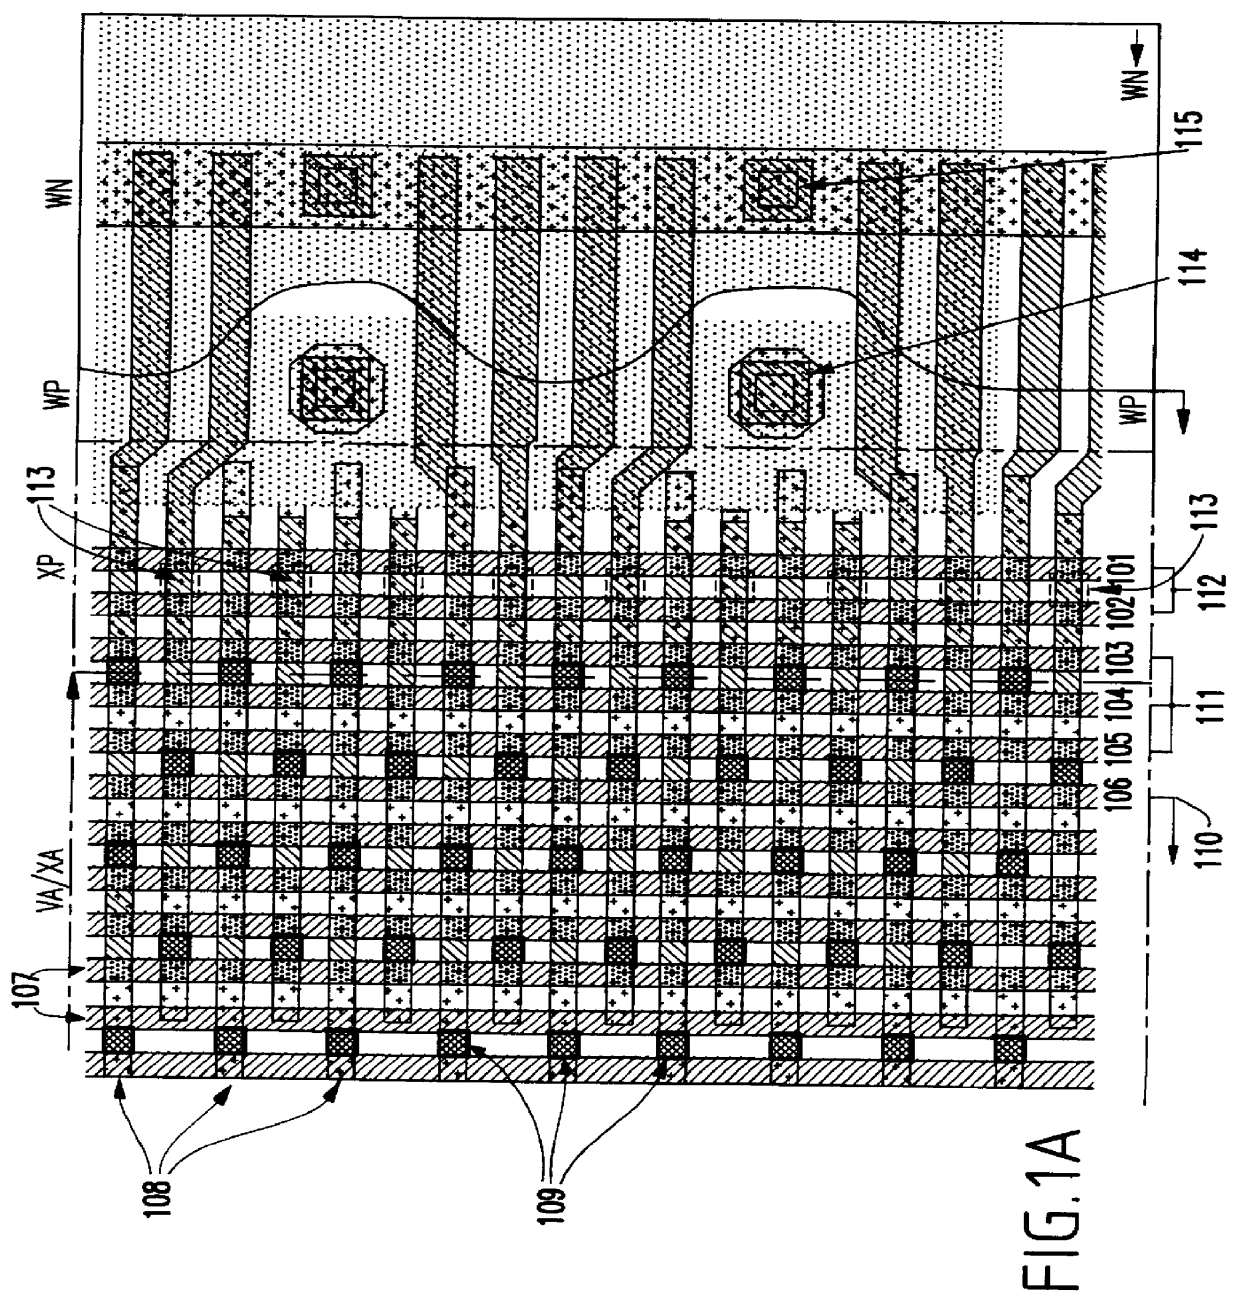 Metal oxide semiconductor capacitor utilizing dummy lithographic patterns